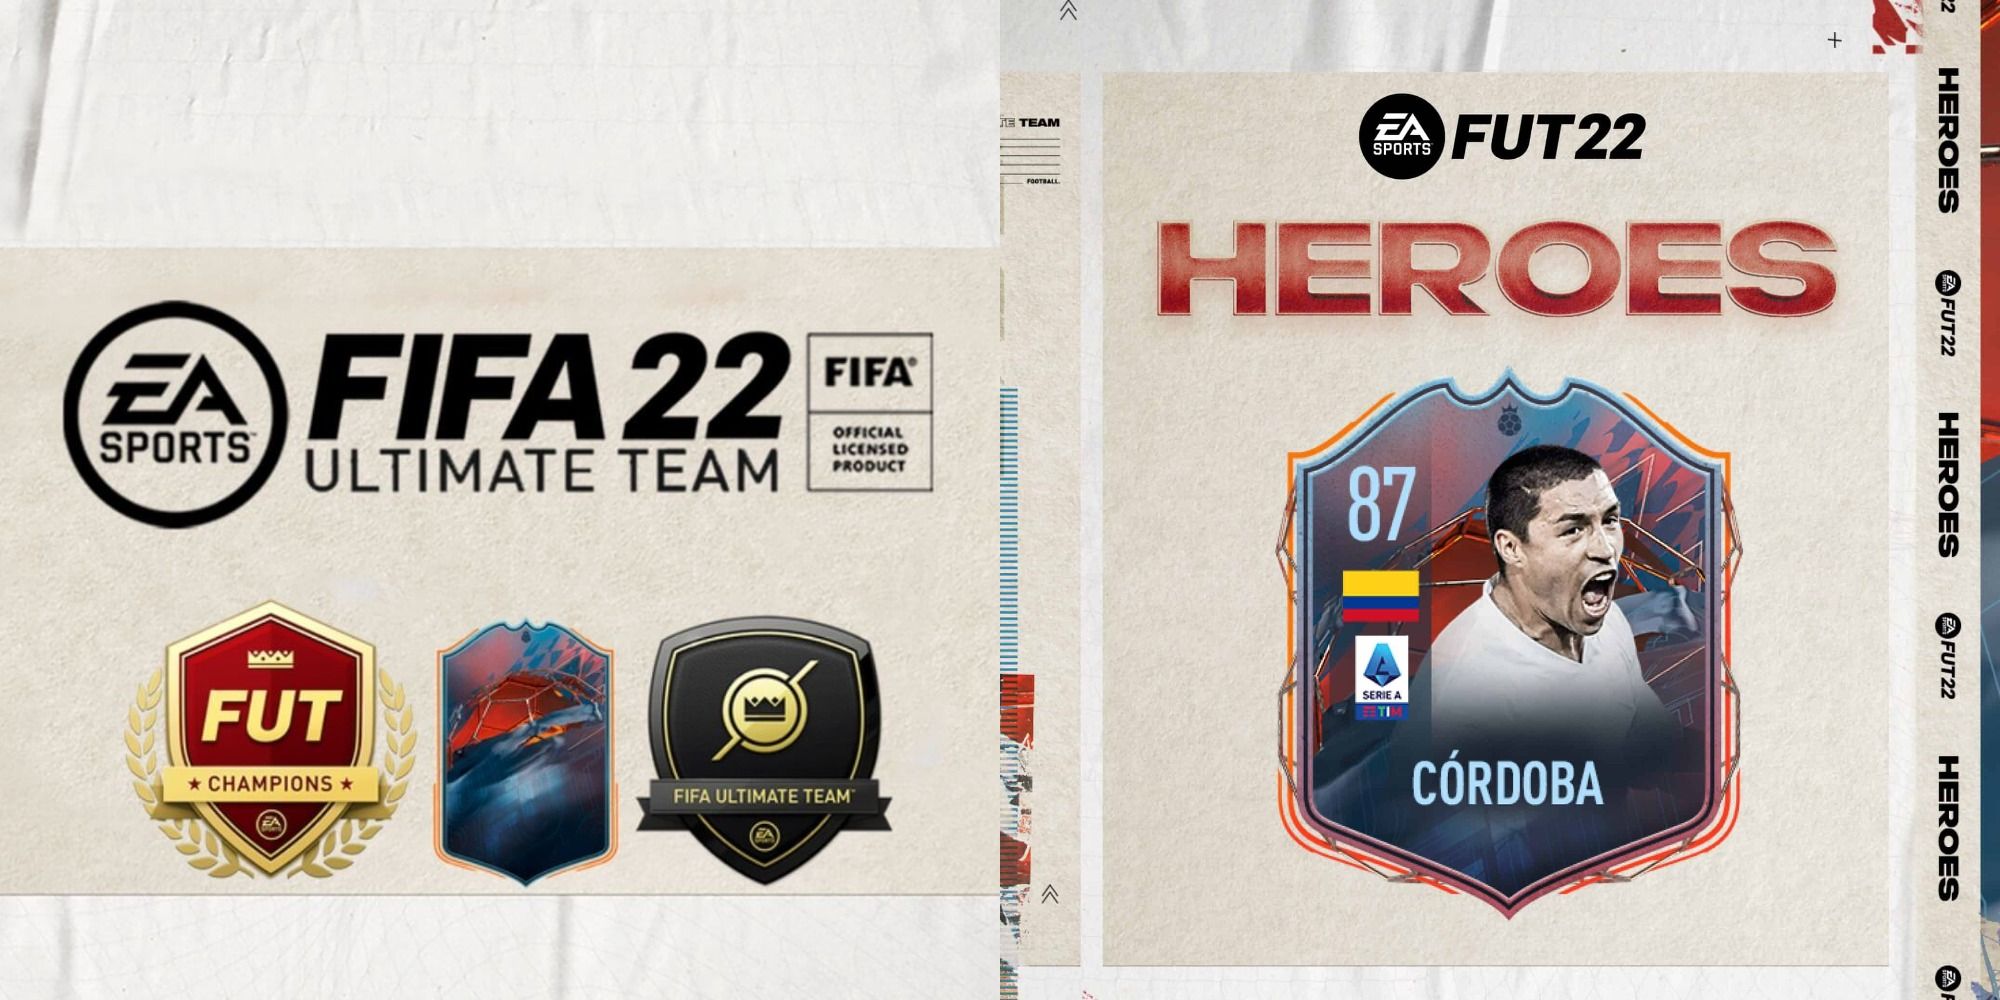 Split image of the FIFA 22 Ultimate Team cover and Ivan Cordoba's hero card